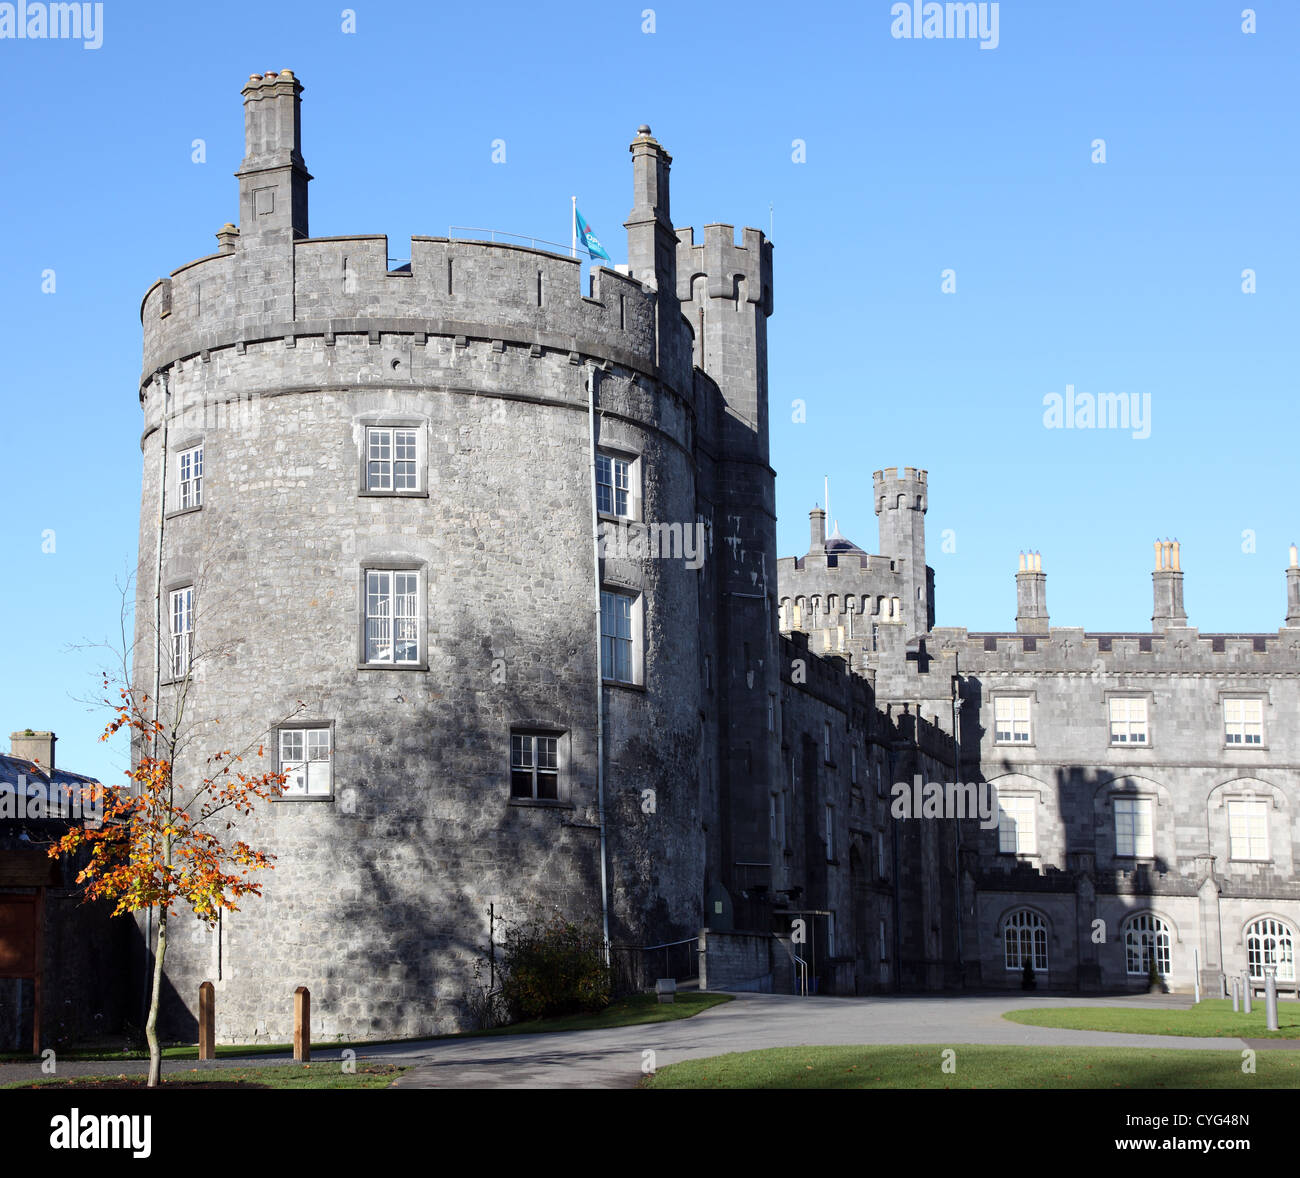 Kilkenny Castle, Anglo-Norman medieval castle built by William Marshall, 1215, and home to the Butler family, Ireland Stock Photo